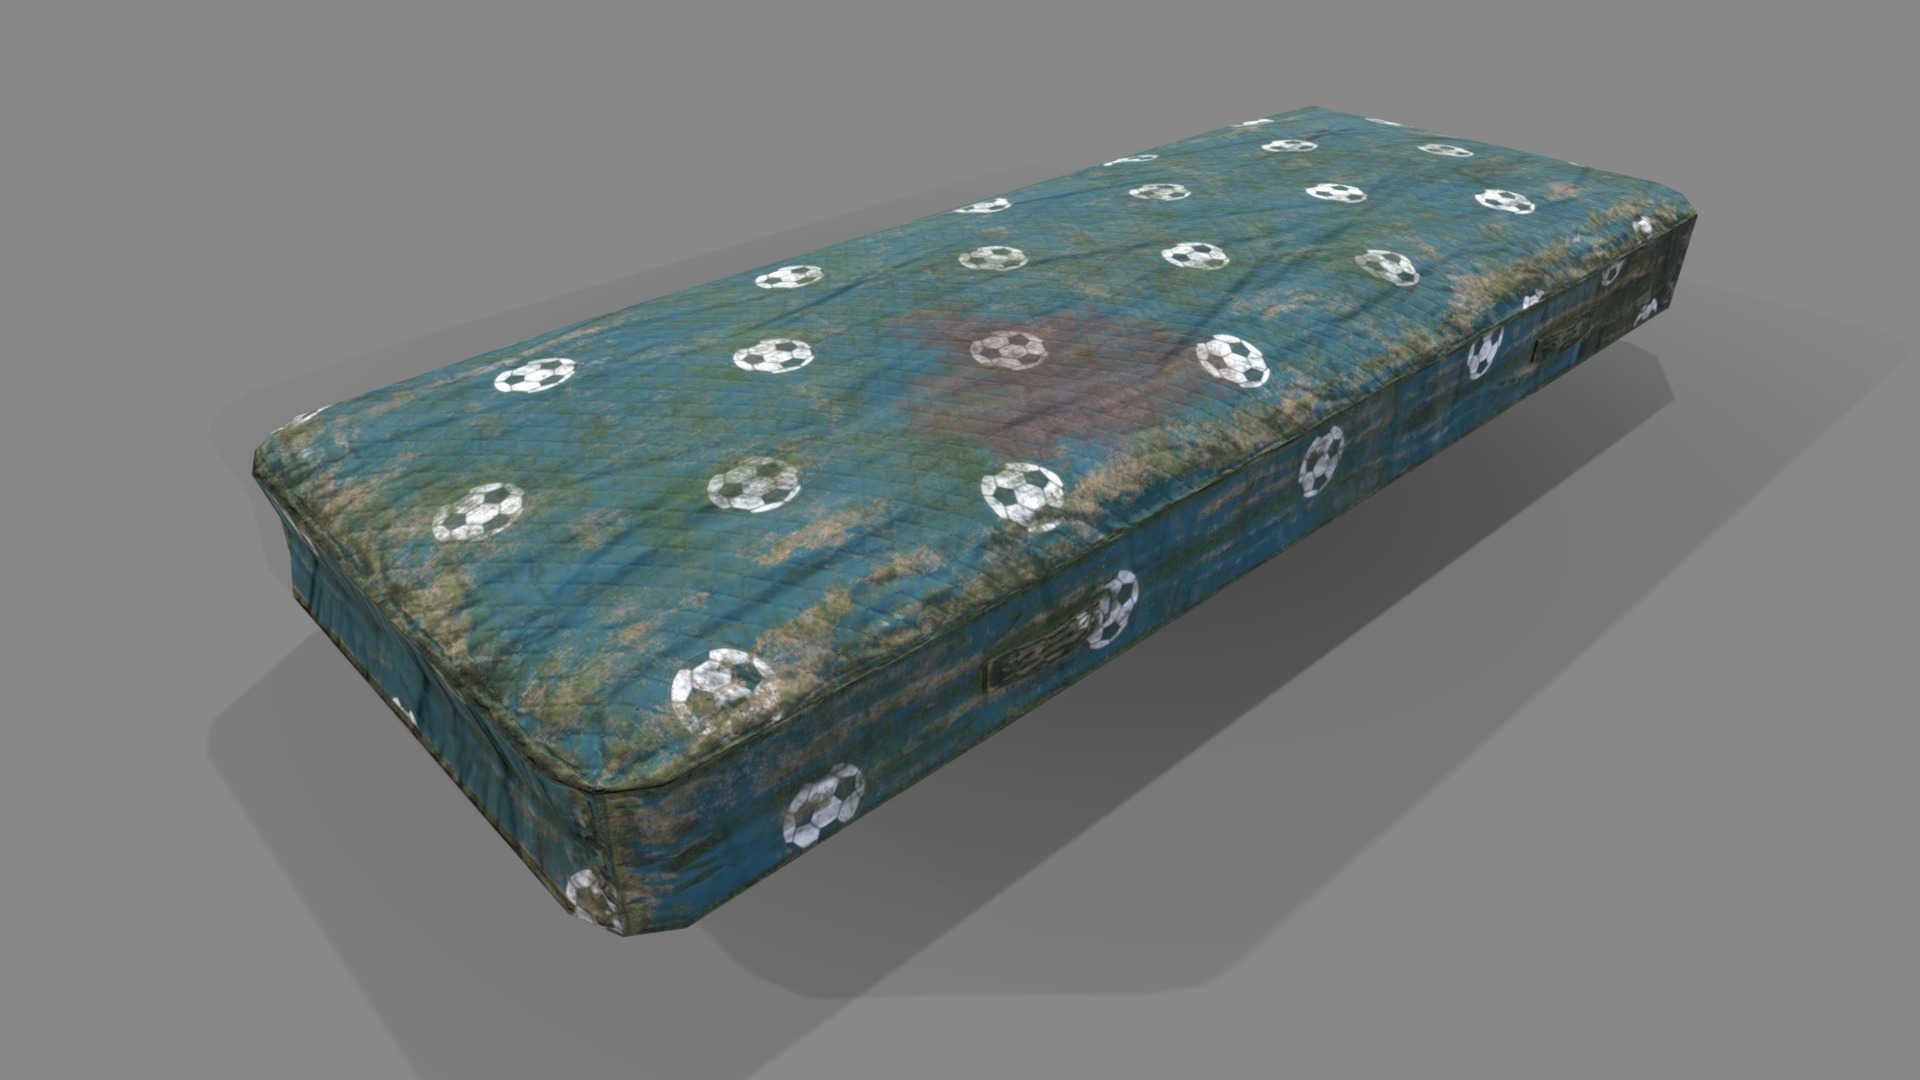 3D model Mattress 2 - This is a 3D model of the Mattress 2. The 3D model is about a rectangular object with a blue surface.